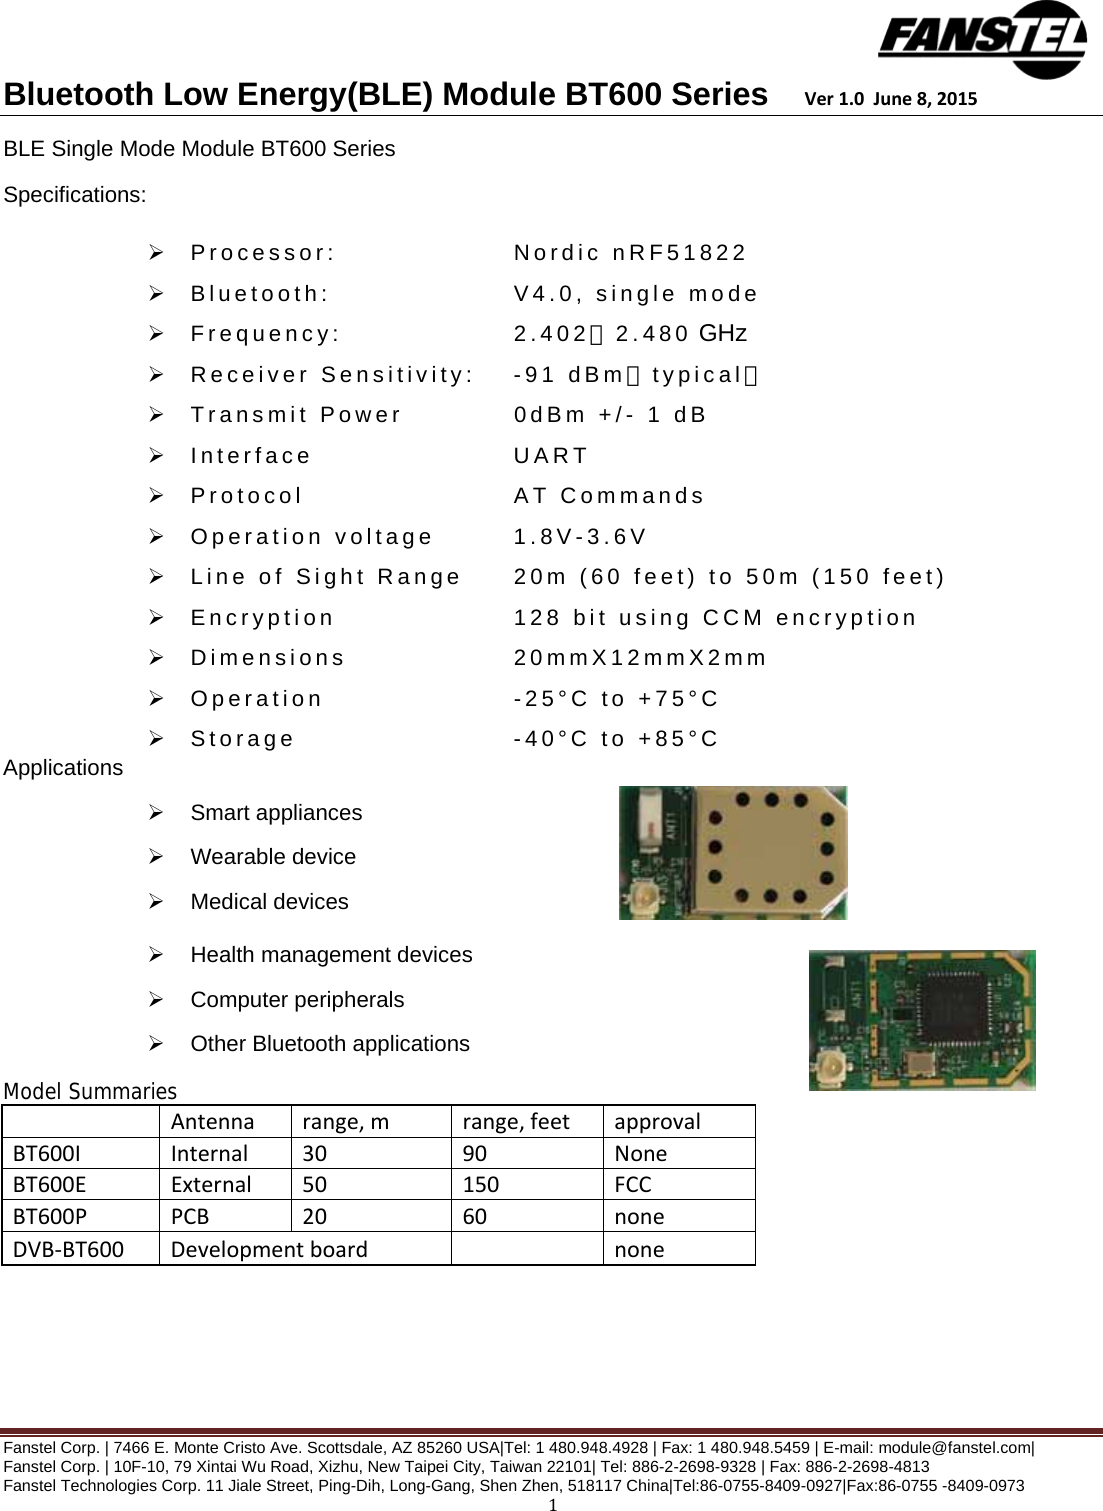 Bluetooth Low Energy(BLE) Module BT600 Series    Ver1.0June8,2015 Fanstel Corp. | 7466 E. Monte Cristo Ave. Scottsdale, AZ 85260 USA|Tel: 1 480.948.4928 | Fax: 1 480.948.5459 | E-mail: module@fanstel.com|  Fanstel Corp. | 10F-10, 79 Xintai Wu Road, Xizhu, New Taipei City, Taiwan 22101| Tel: 886-2-2698-9328 | Fax: 886-2-2698-4813 Fanstel Technologies Corp. 11 Jiale Street, Ping-Dih, Long-Gang, Shen Zhen, 518117 China|Tel:86-0755-8409-0927|Fax:86-0755 -8409-0973 1BLE Single Mode Module BT600 Series Specifications:    Processor:      Nordic nRF51822   Bluetooth:      V4.0, single mode  Frequency:      2.402～2.480 GHz   Receiver Sensitivity:  -91 dBm（typical）   Transmit Power    0dBm +/- 1 dB  Interface      UART  Protocol      AT Commands  Operation voltage   1.8V-3.6V   Line of Sight Range  20m (60 feet) to 50m (150 feet)   Encryption      128 bit using CCM encryption  Dimensions     20mmX12mmX2mm  Operation      -25°C to +75°C  Storage      -40°C to +85°C  Applications  Smart appliances  Wearable device  Medical devices  Health management devices  Computer peripherals  Other Bluetooth applications Model Summaries  Antennarange,mrange,feetapprovalBT600IInternal3090NoneBT600EExternal50150FCCBT600PPCB2060noneDVB‐BT600Developmentboard none 